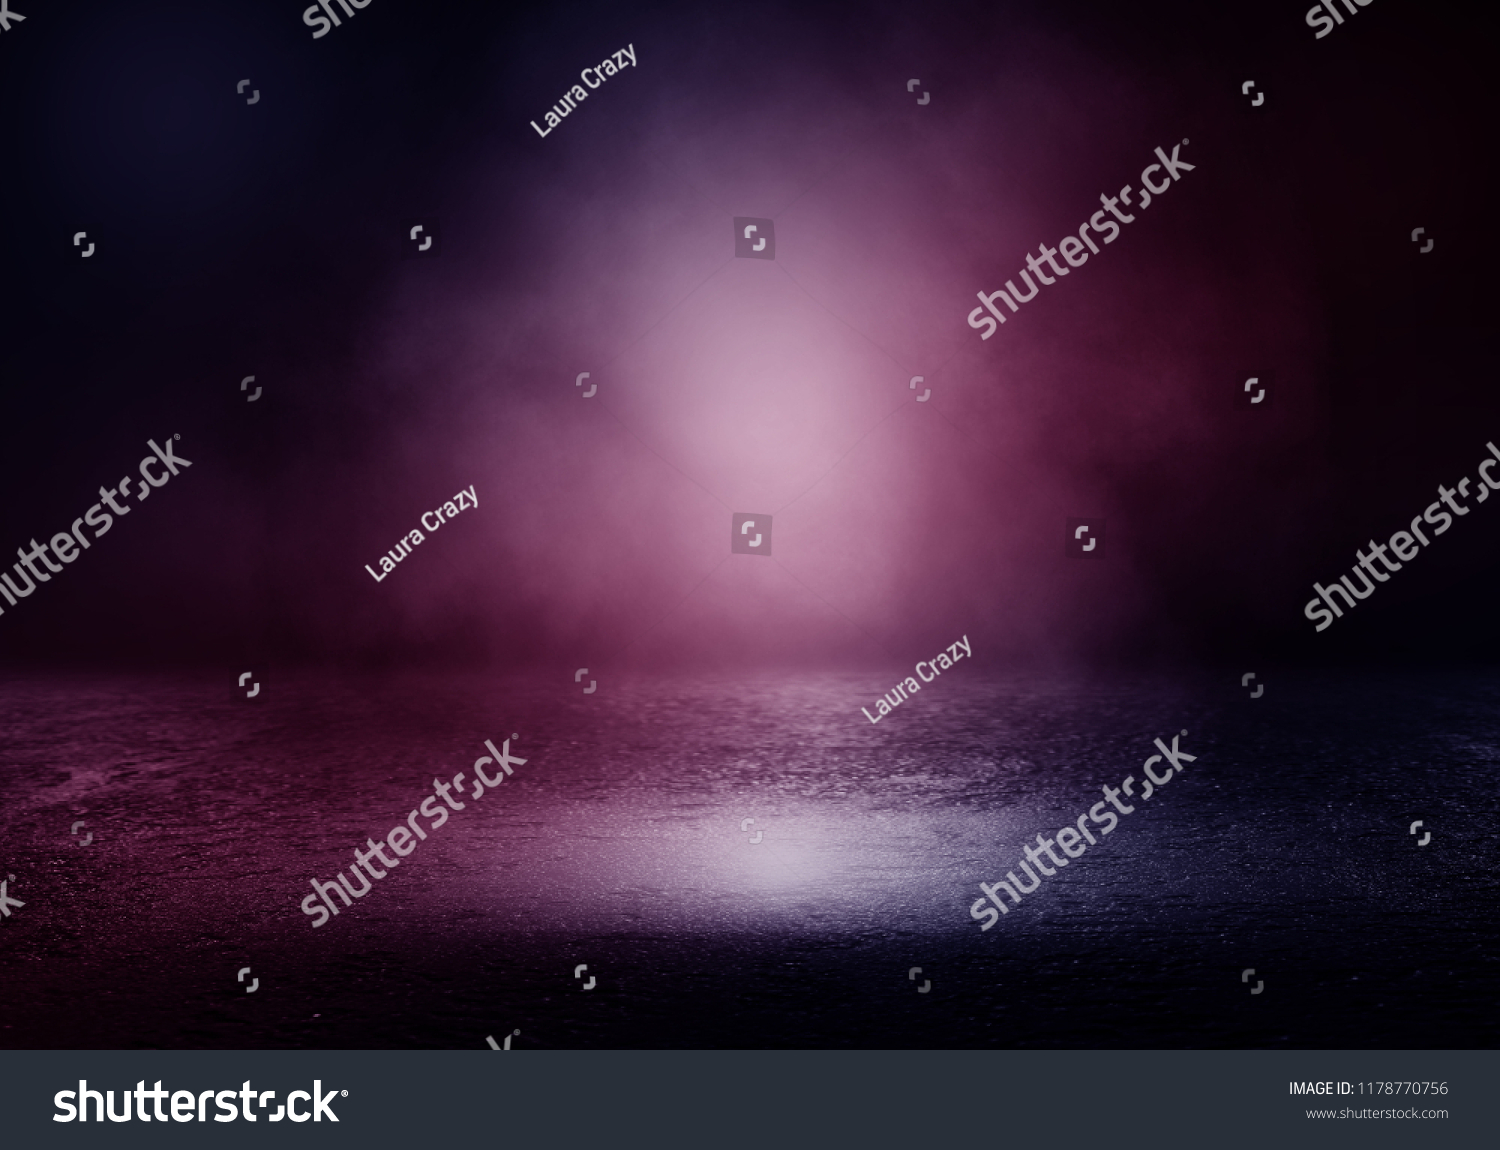 Background of an empty room with smoke and neon light. Dark purple abstract background #1178770756